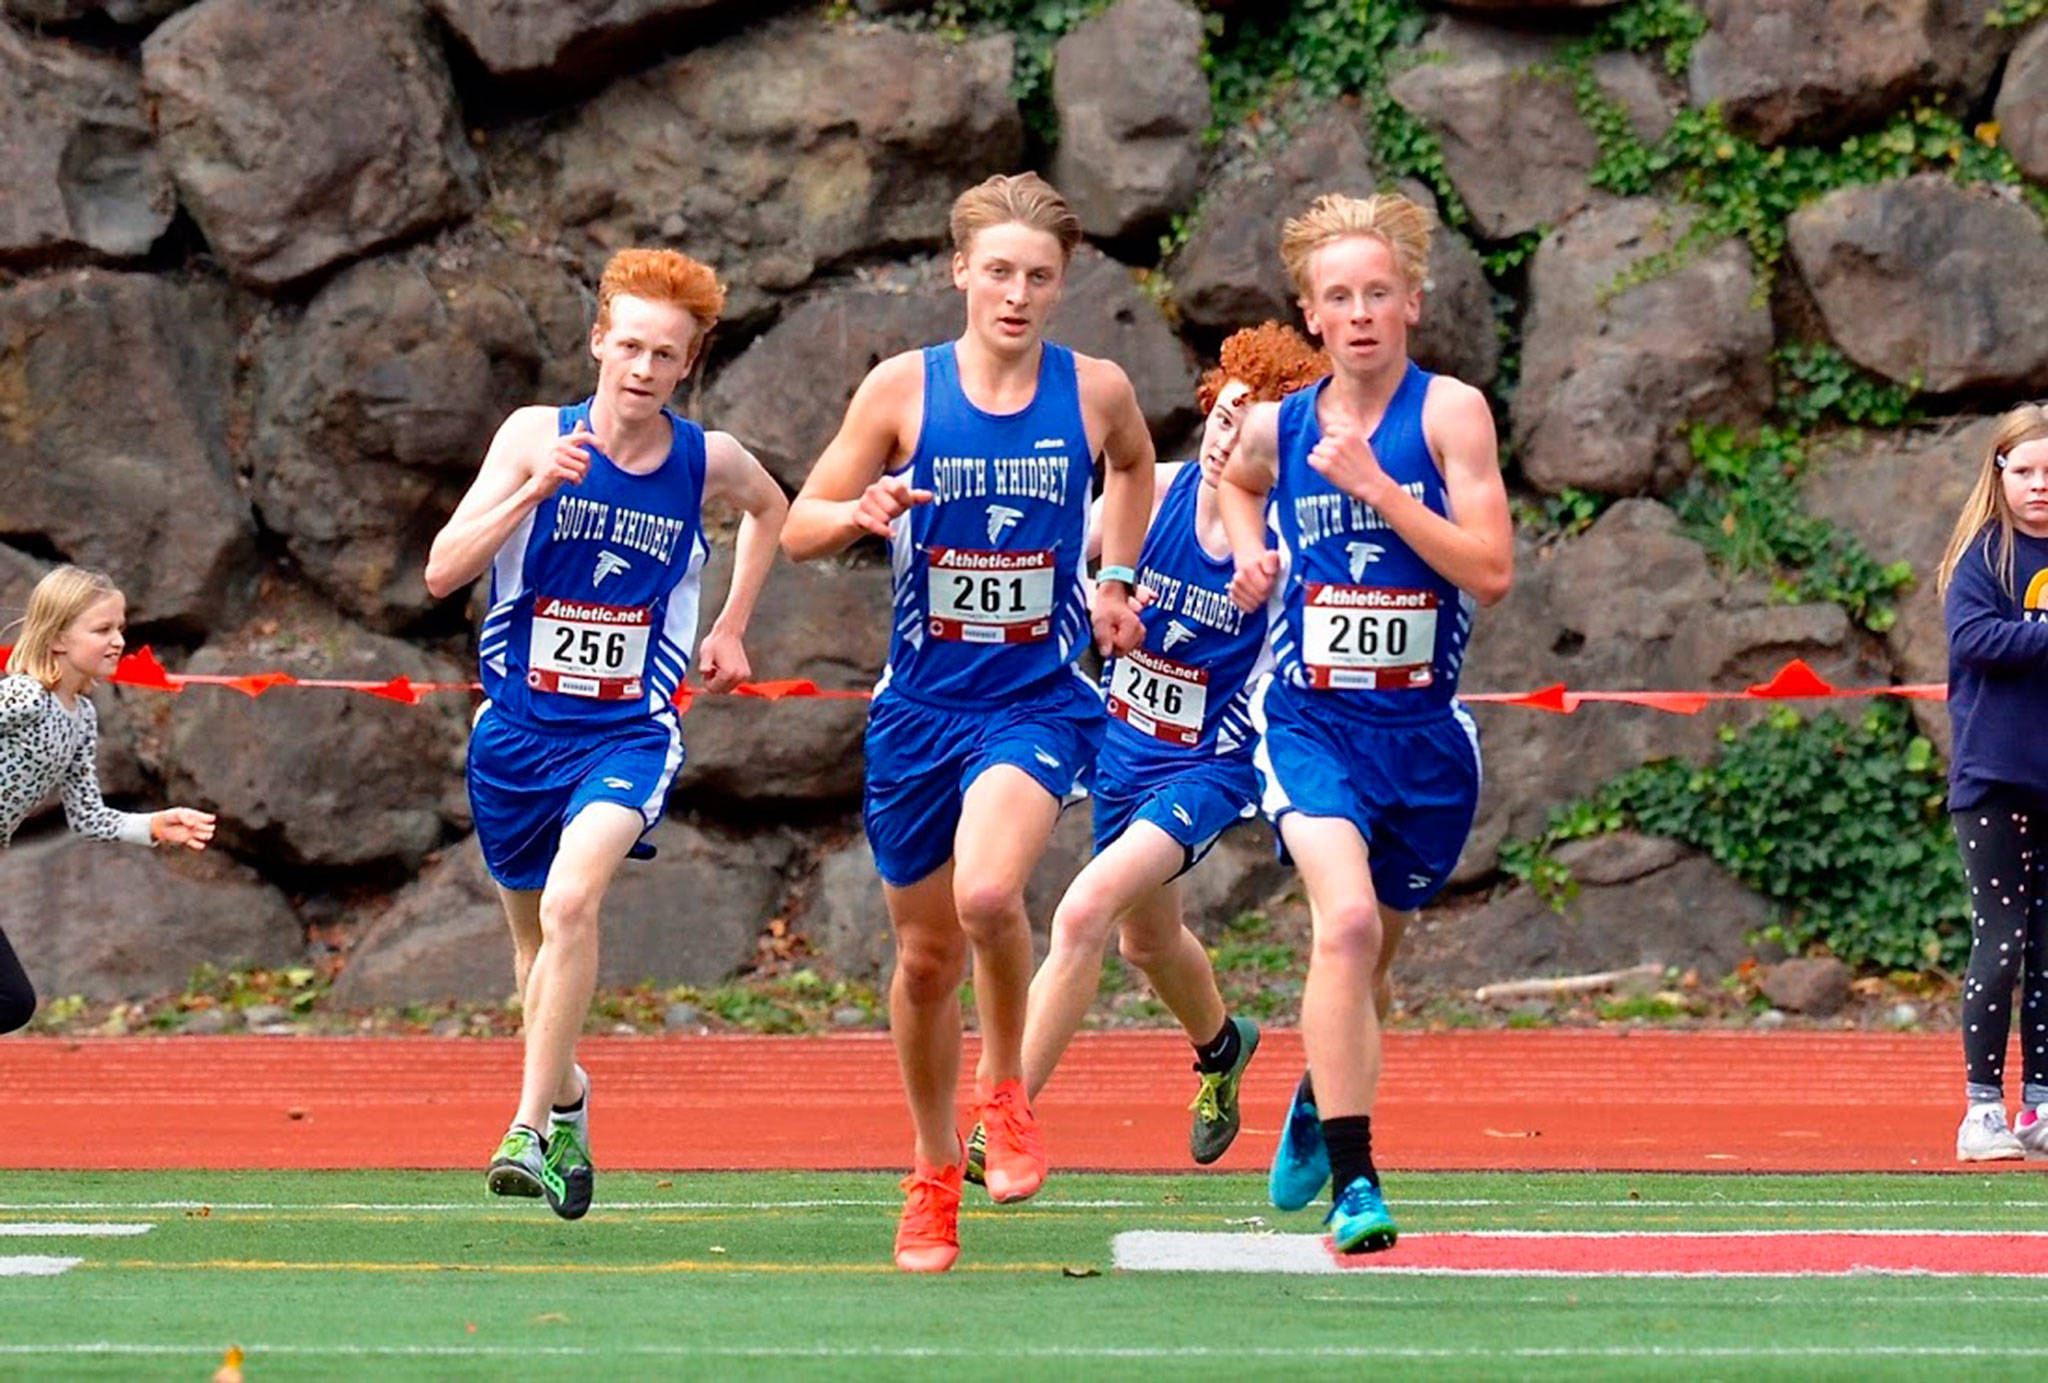 South Whidbey’s Reilly McVay, left, Cooper Ullmann, Aidan Donnelly and Thomas Simms head the the finish line in Thursday’s race at King’s. (Photo by Karen Swegler)